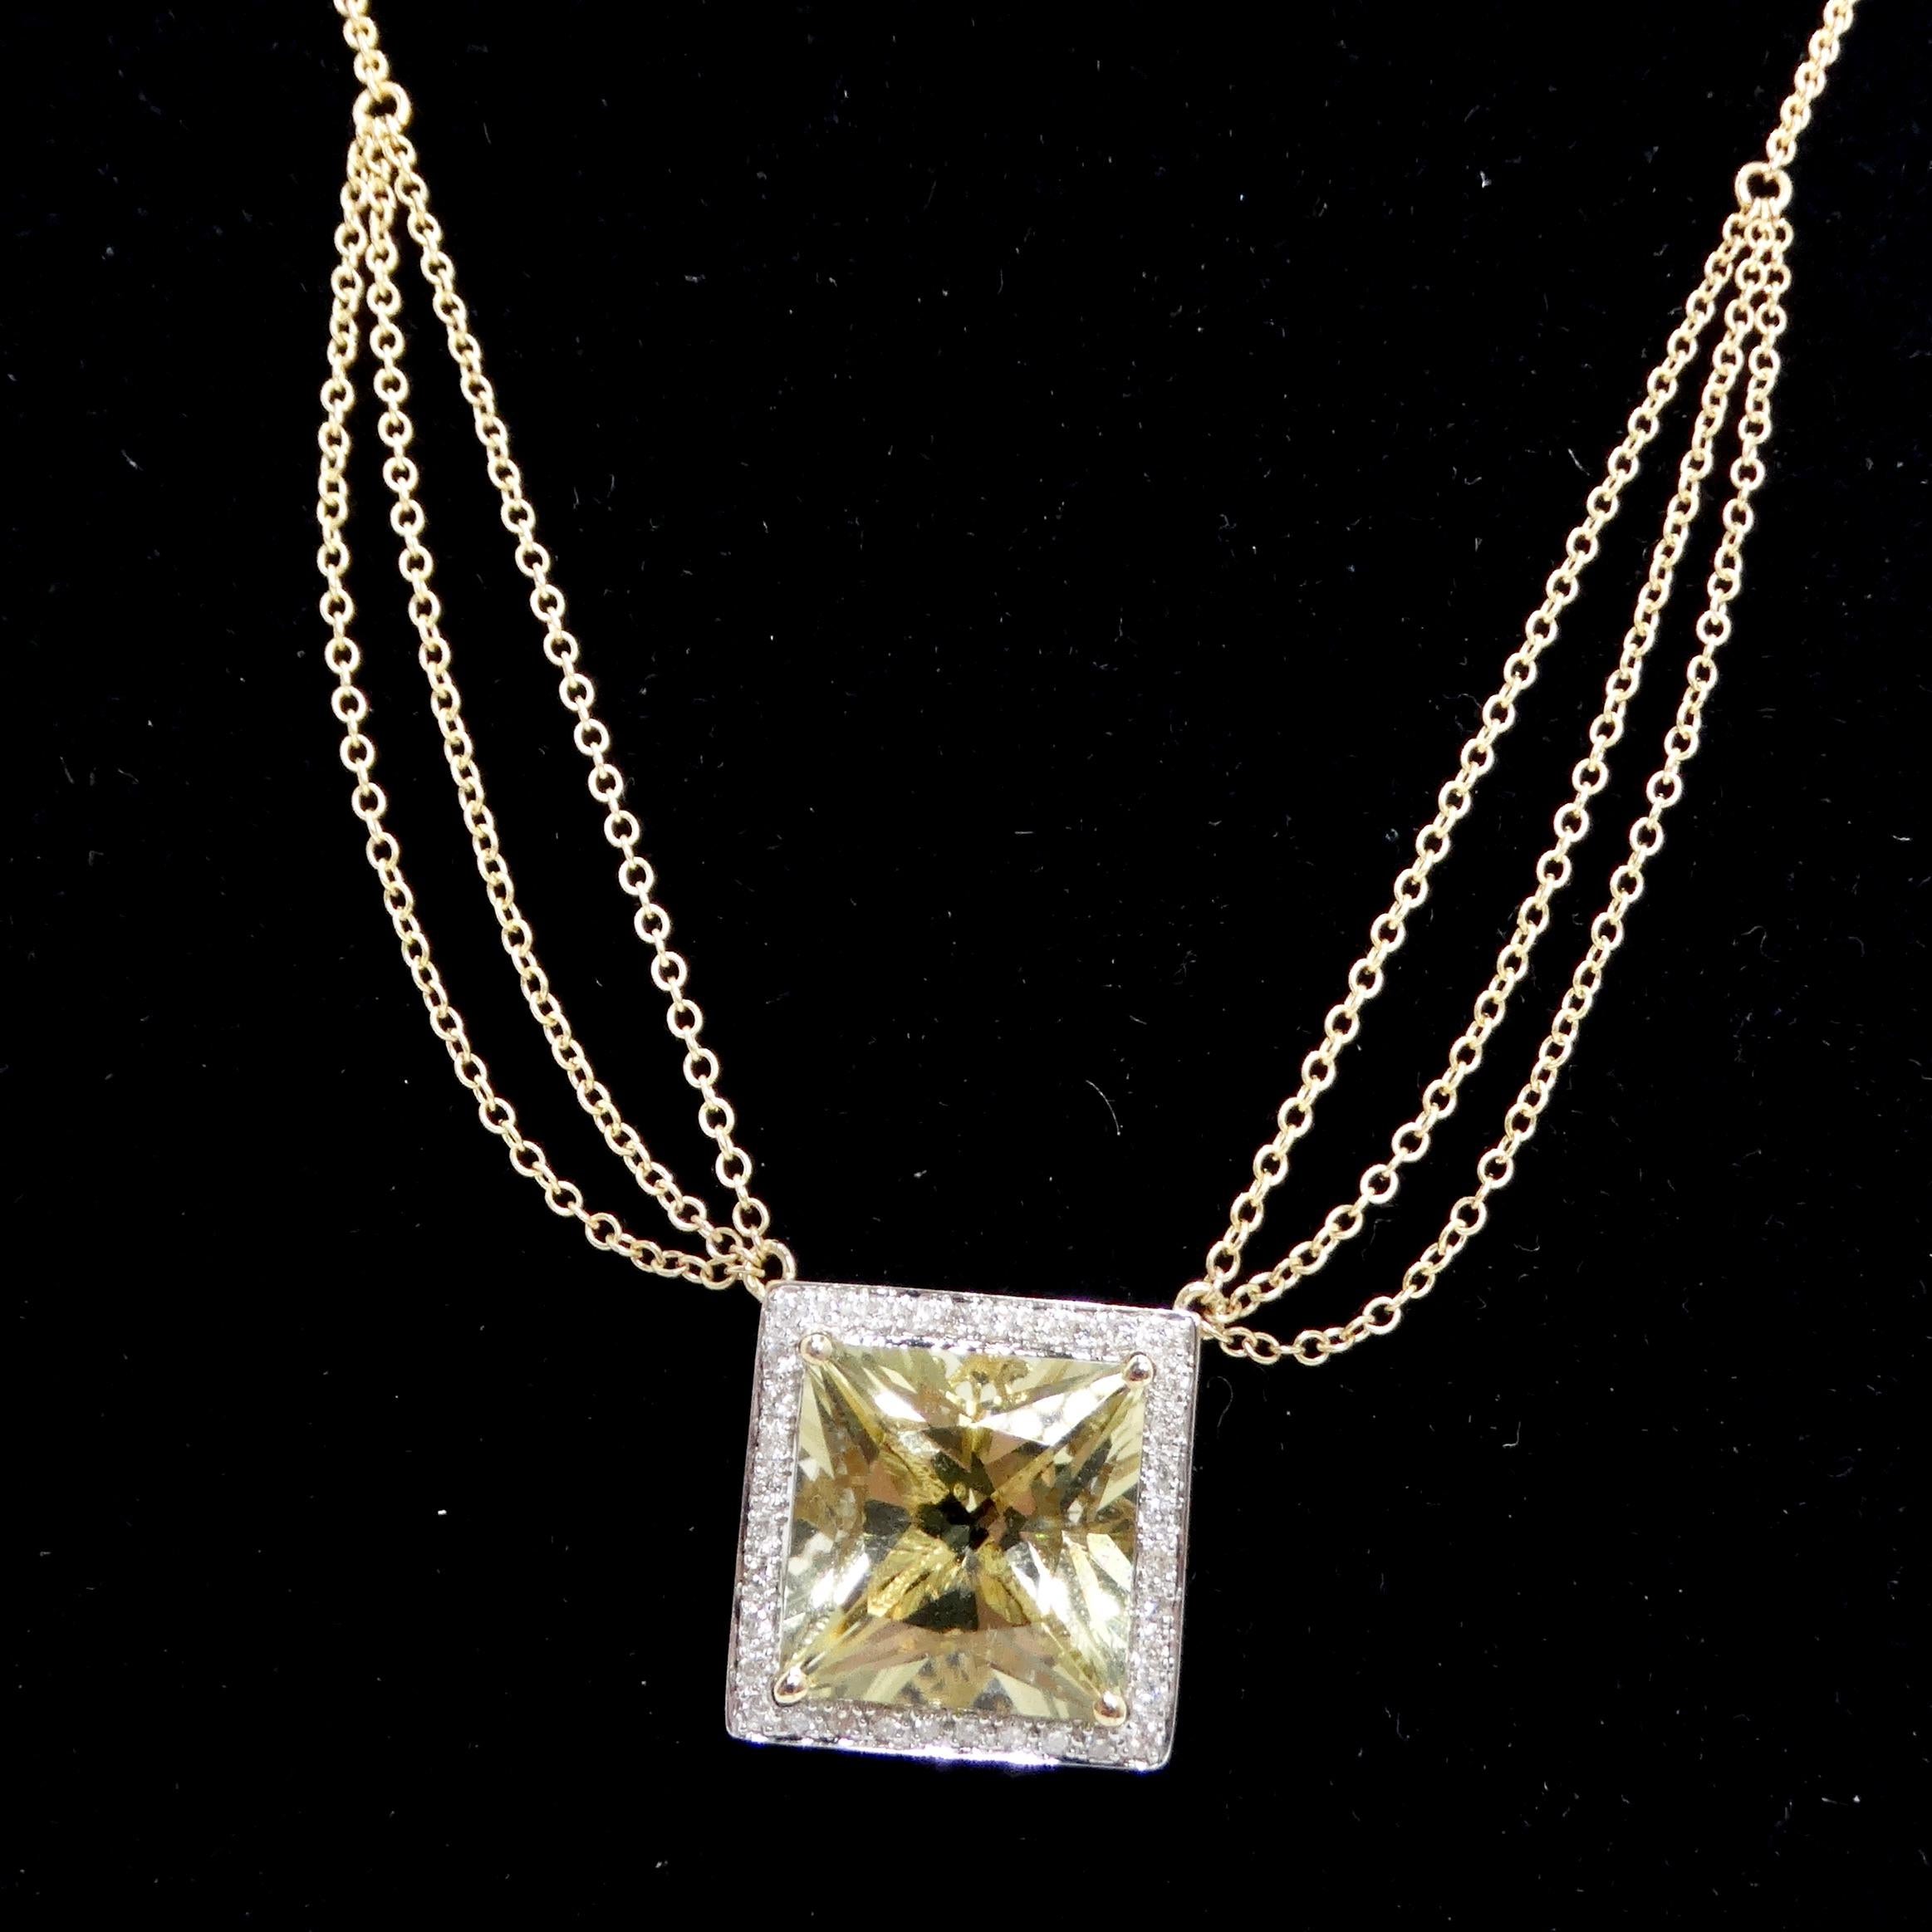 14K Gold Citrine Diamond Necklace and Earrings Set For Sale 4